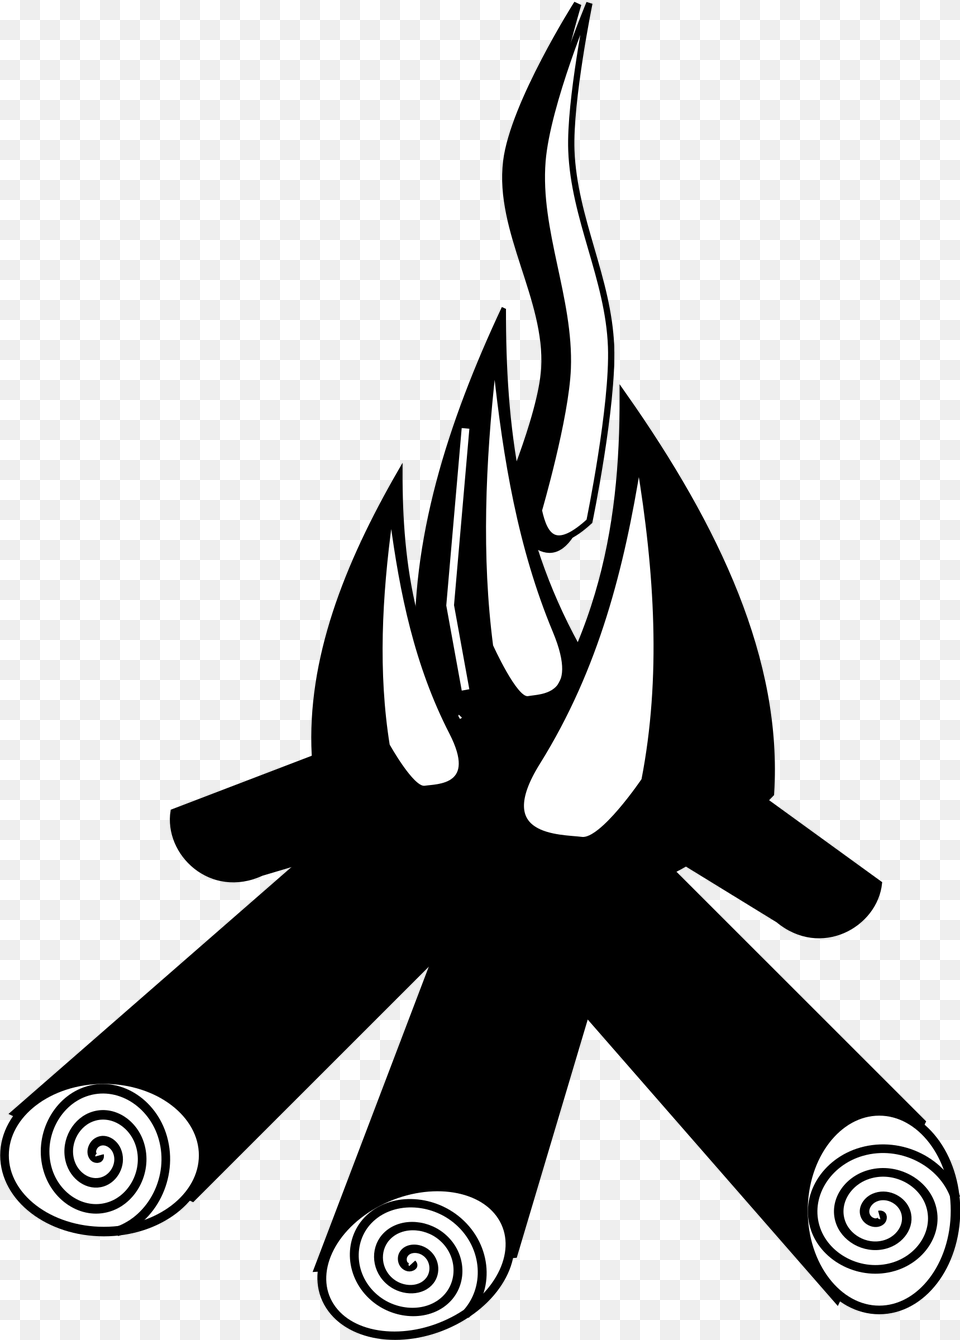 Campfire Big Campfire Black And White, Fire, Flame Png